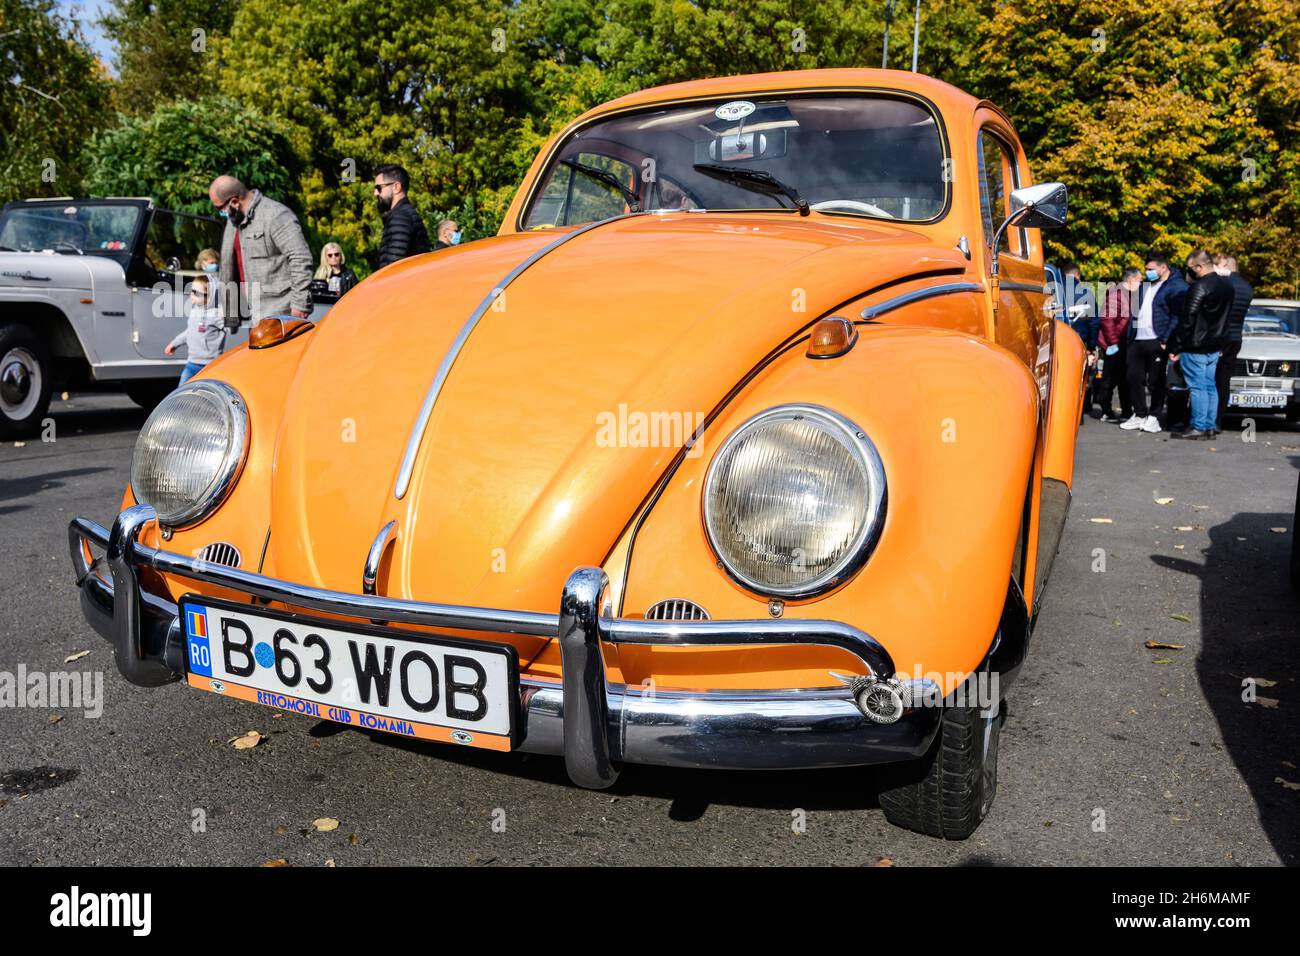 Bucharest, Romania, 24 October 2021: One vivid orange Volkswagen Beetle German vintage car  parked in a street at an event for vintage cars collection Stock Photo